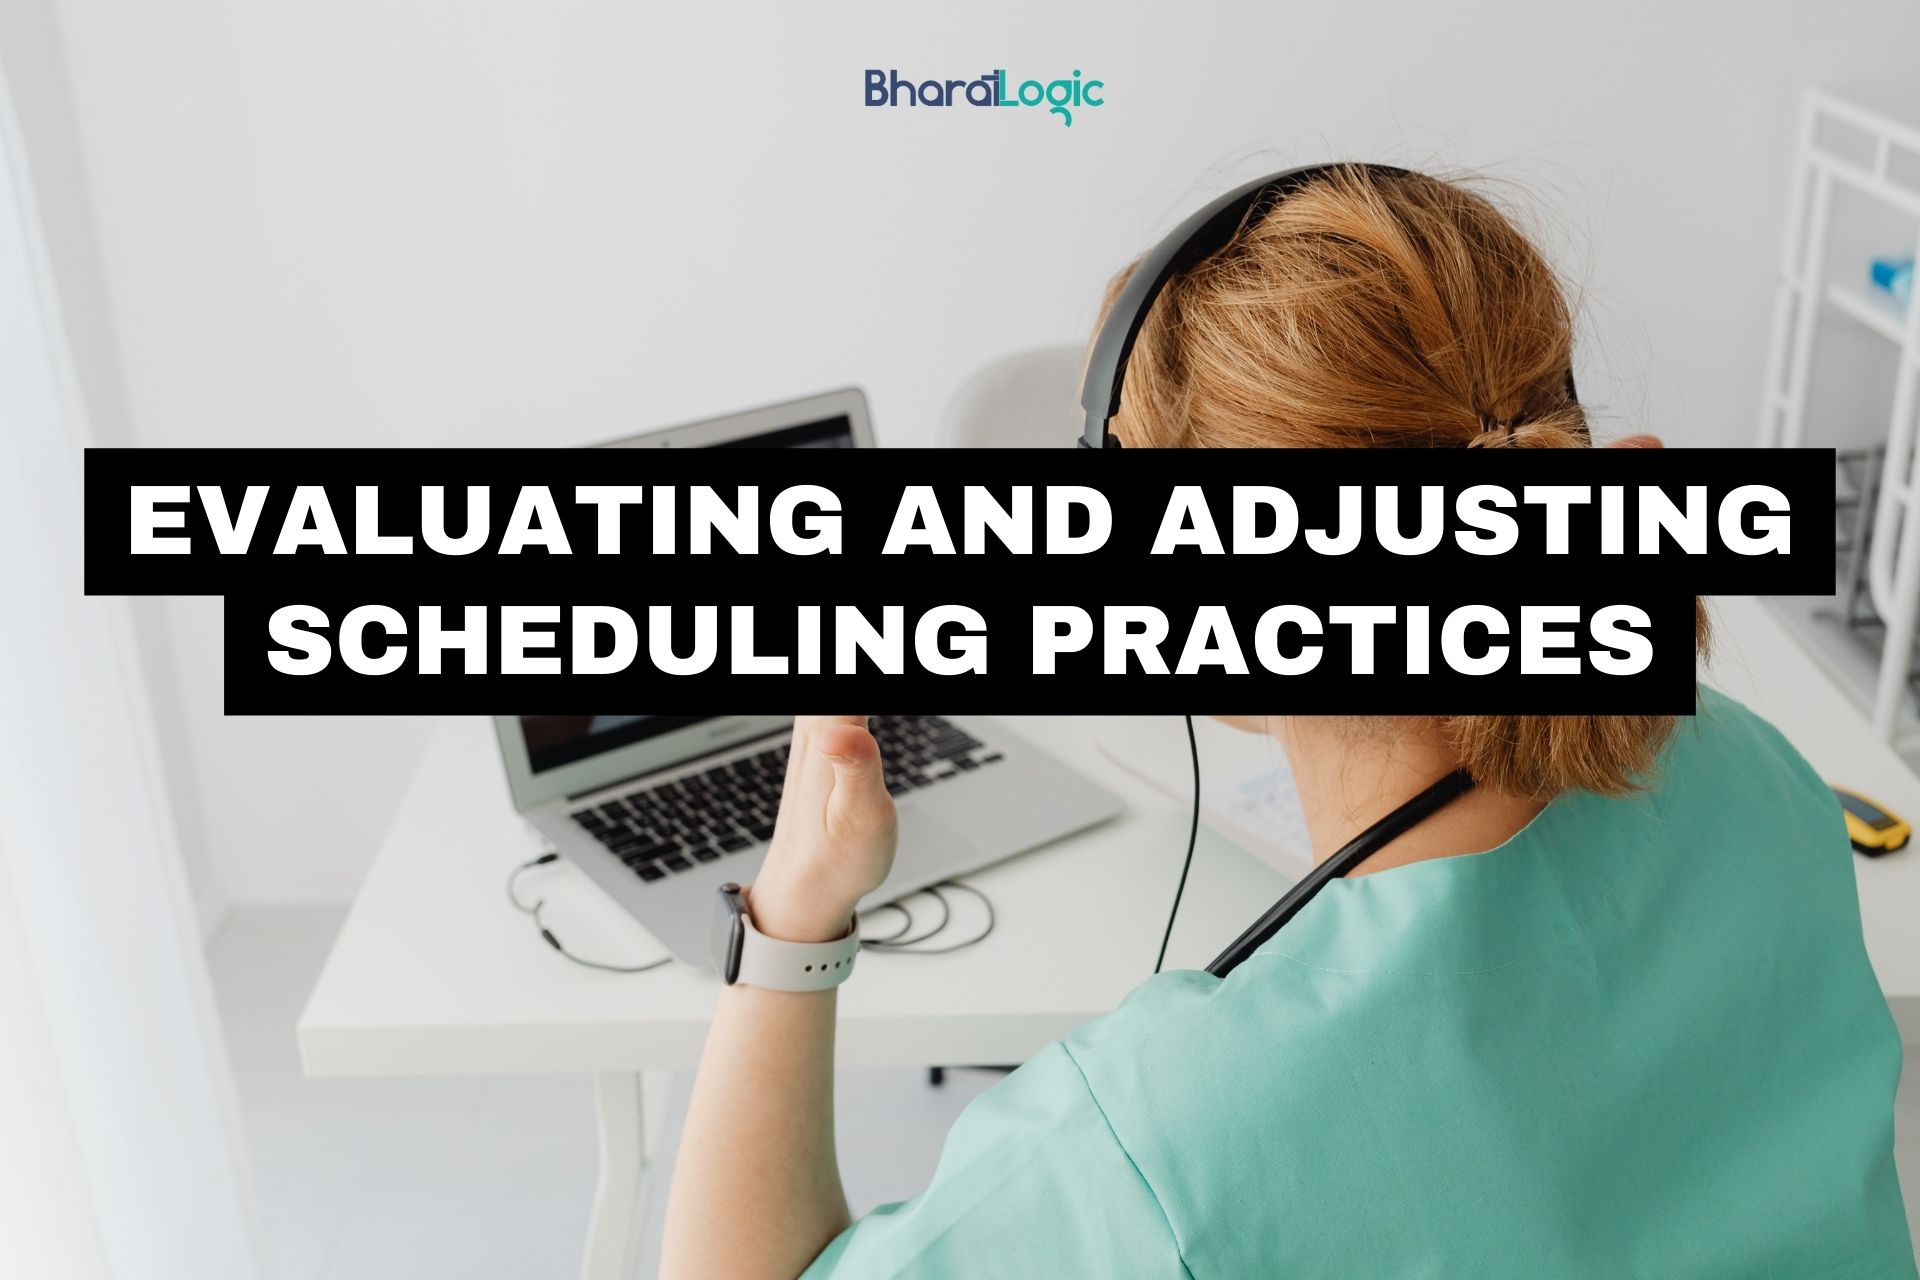 Evaluating and Adjusting Scheduling Practices